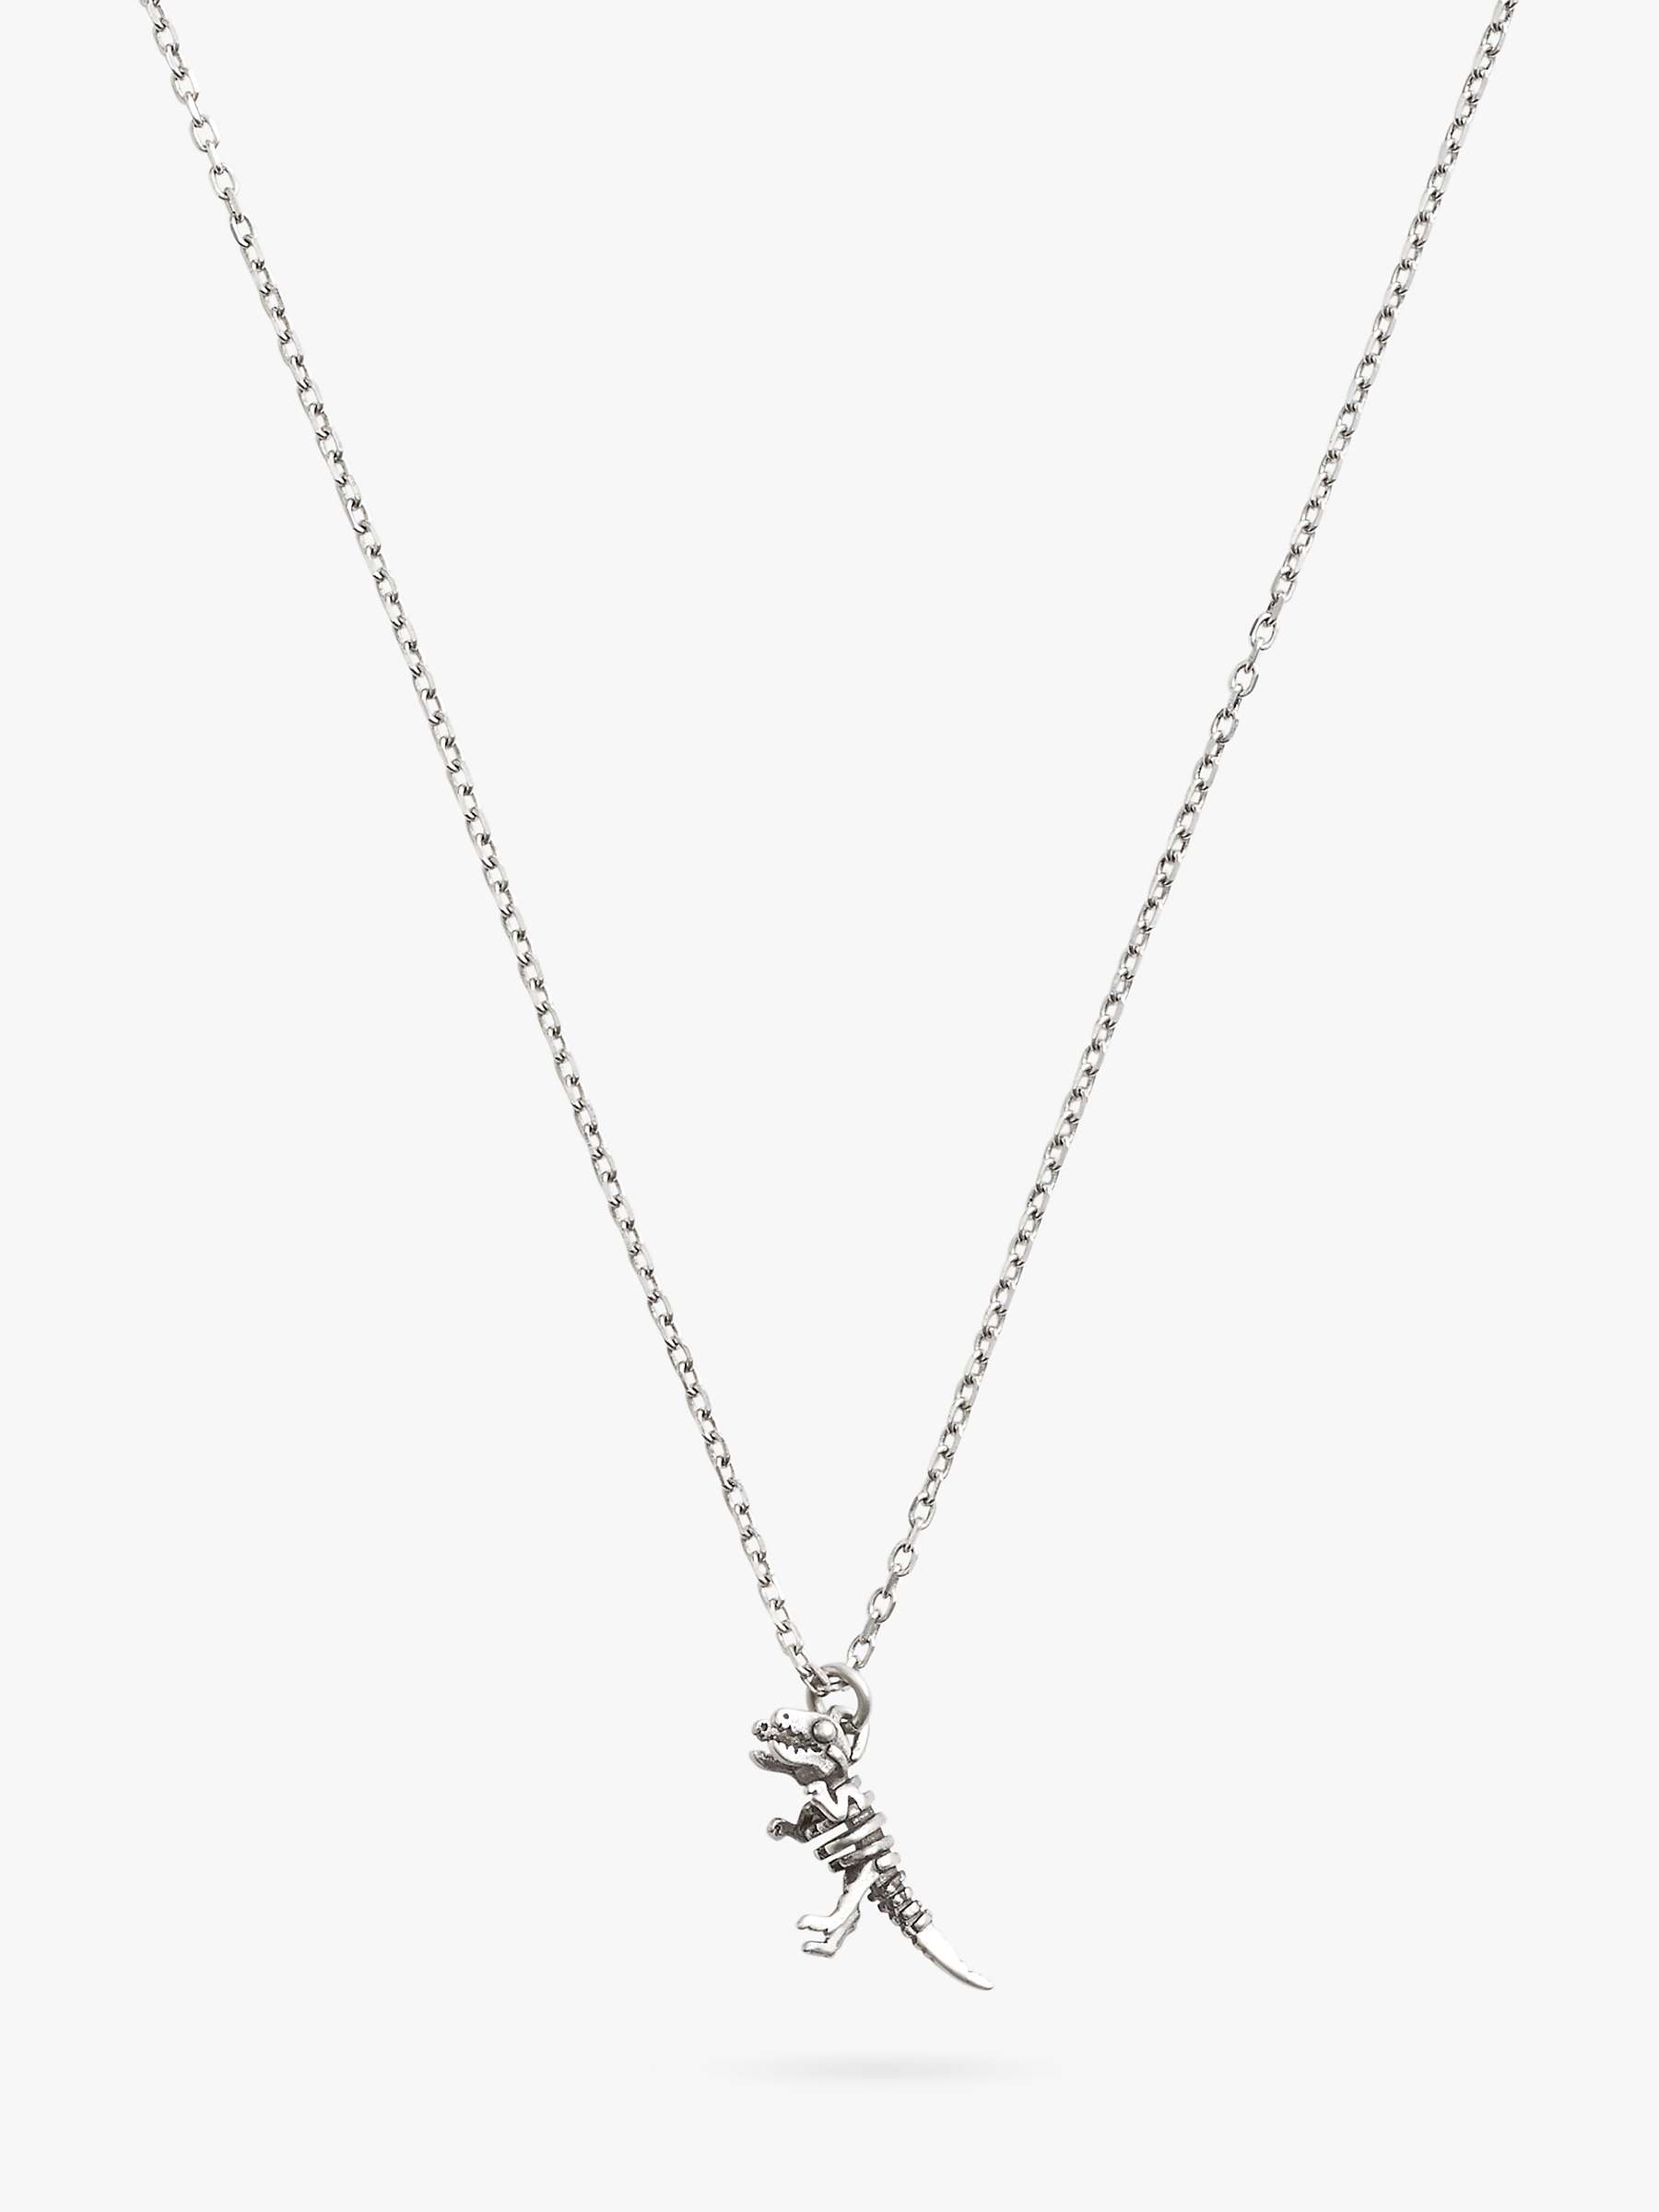 Buy Coach Rexy Dino Skeleton Pendant Necklace, Silver Online at johnlewis.com